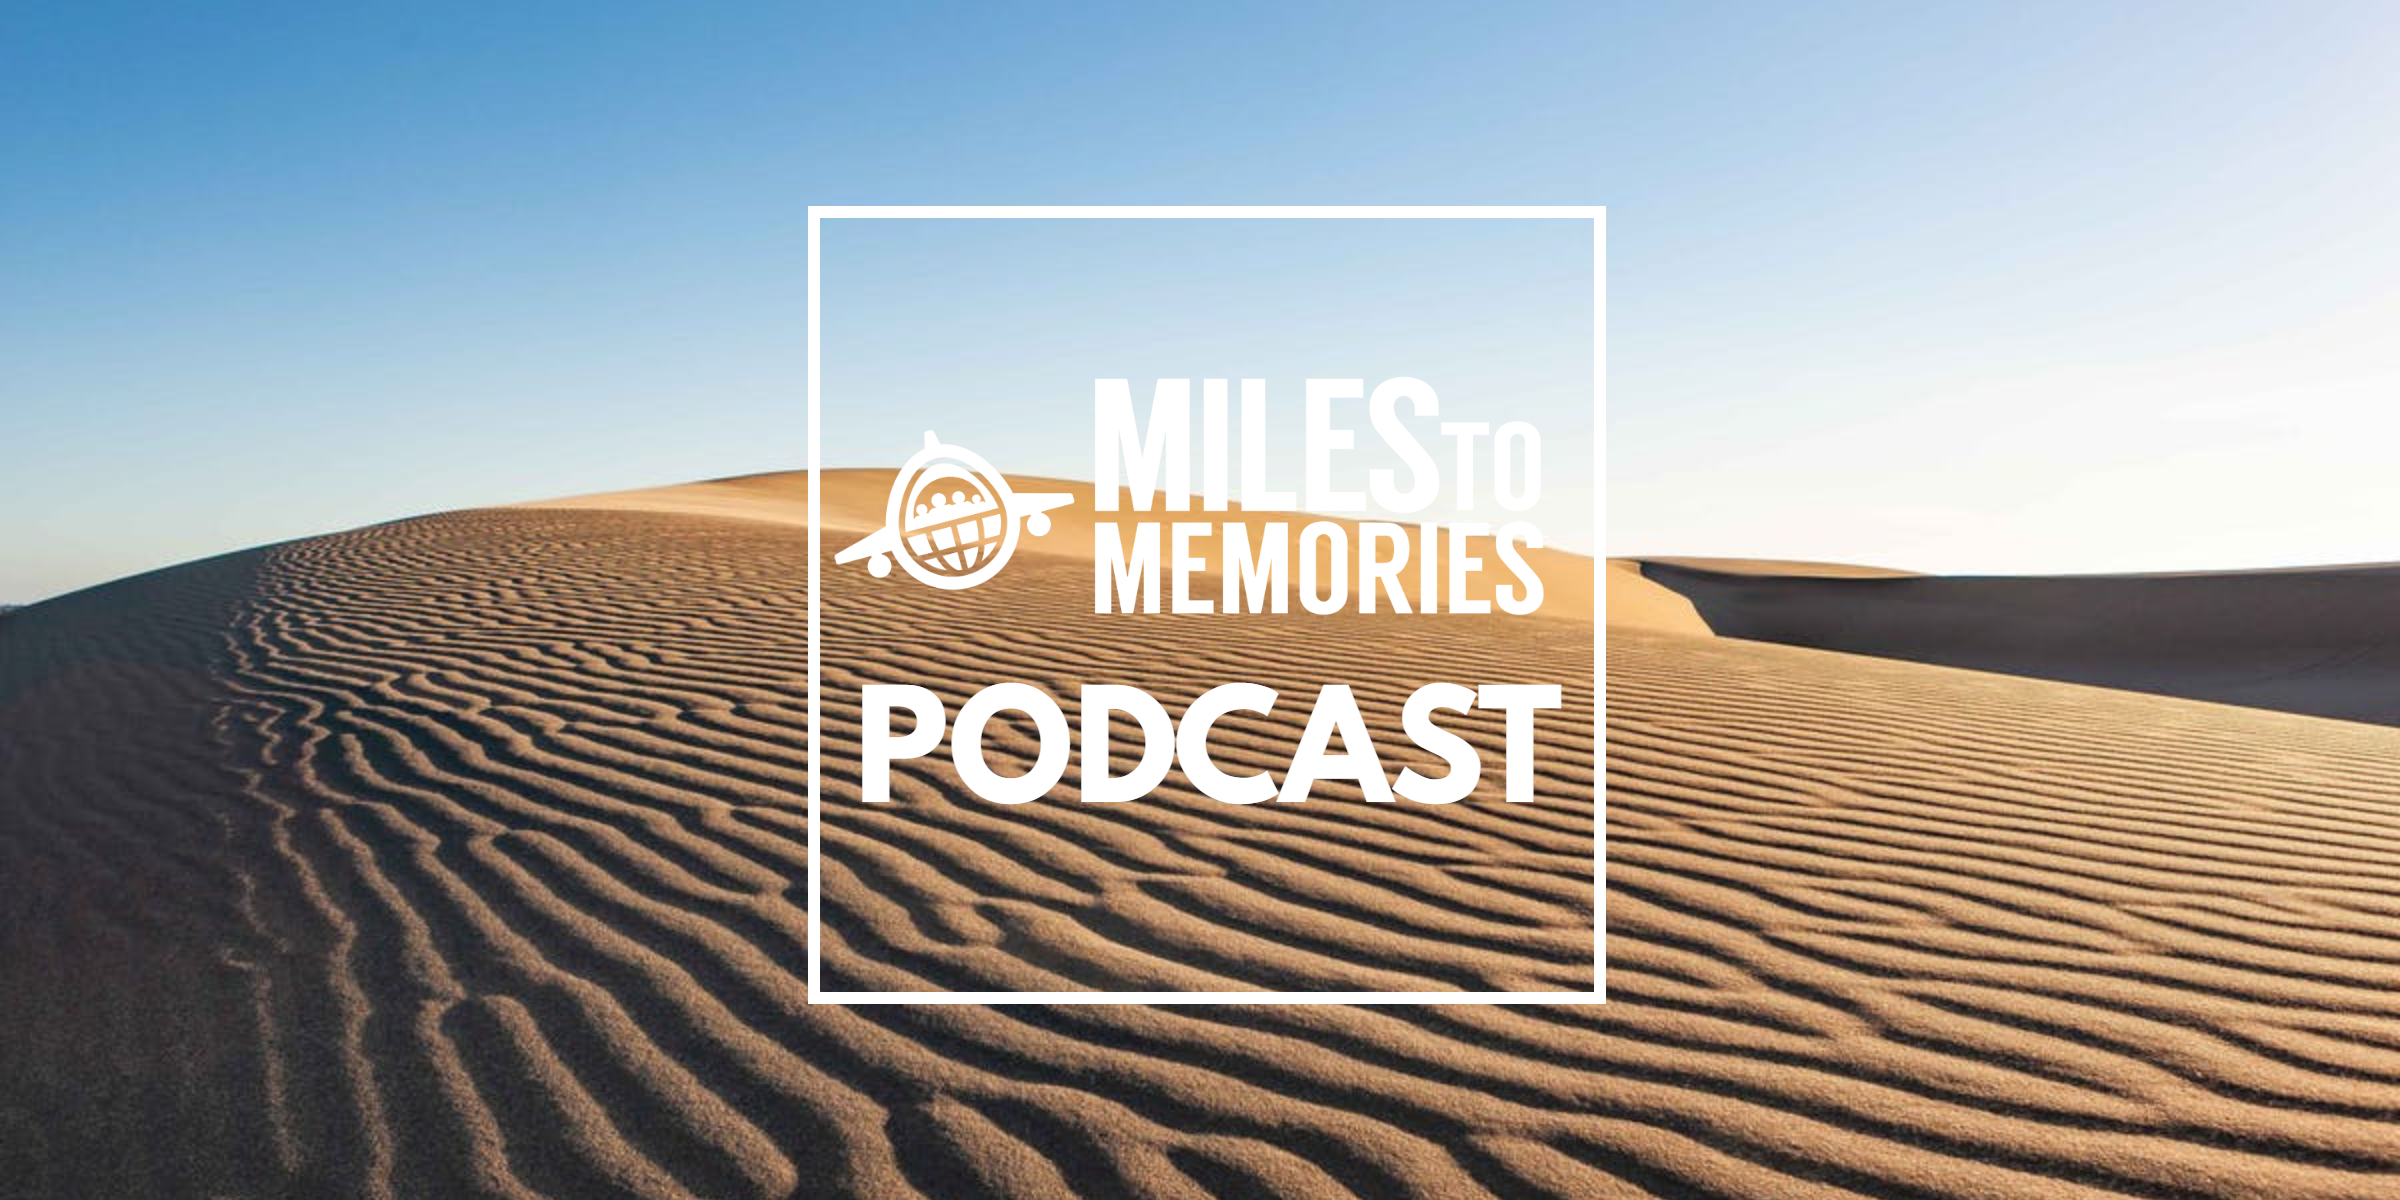 Miles to Memories Podcast Episode 2